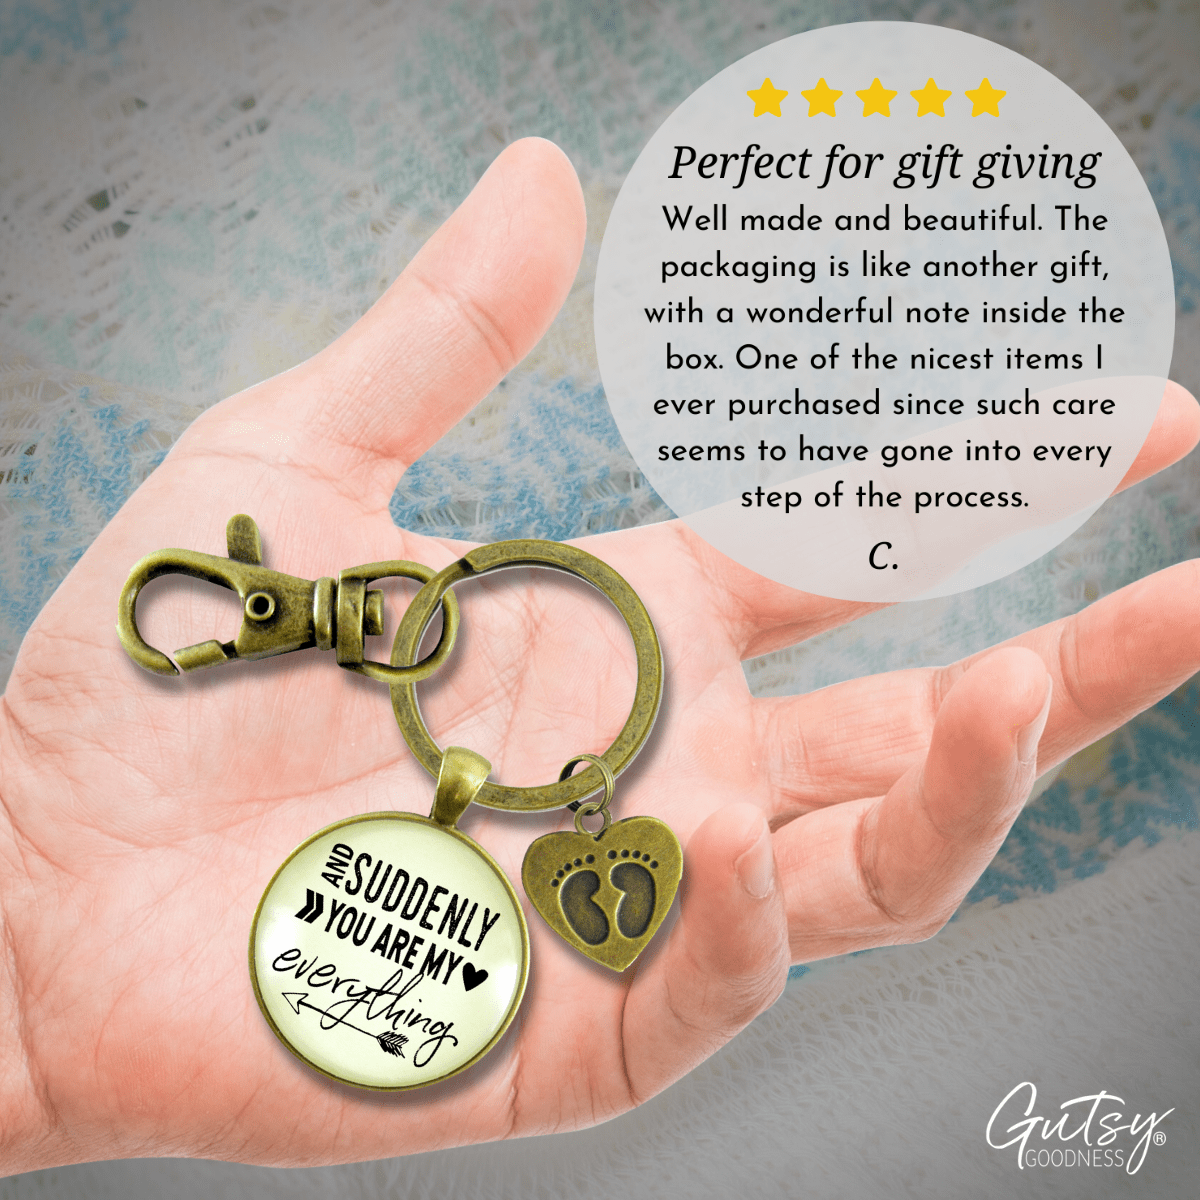 First Father's Day Keychain Suddenly You Are My Everything New Dad Gift Key Baby Feet Charm - Gutsy Goodness